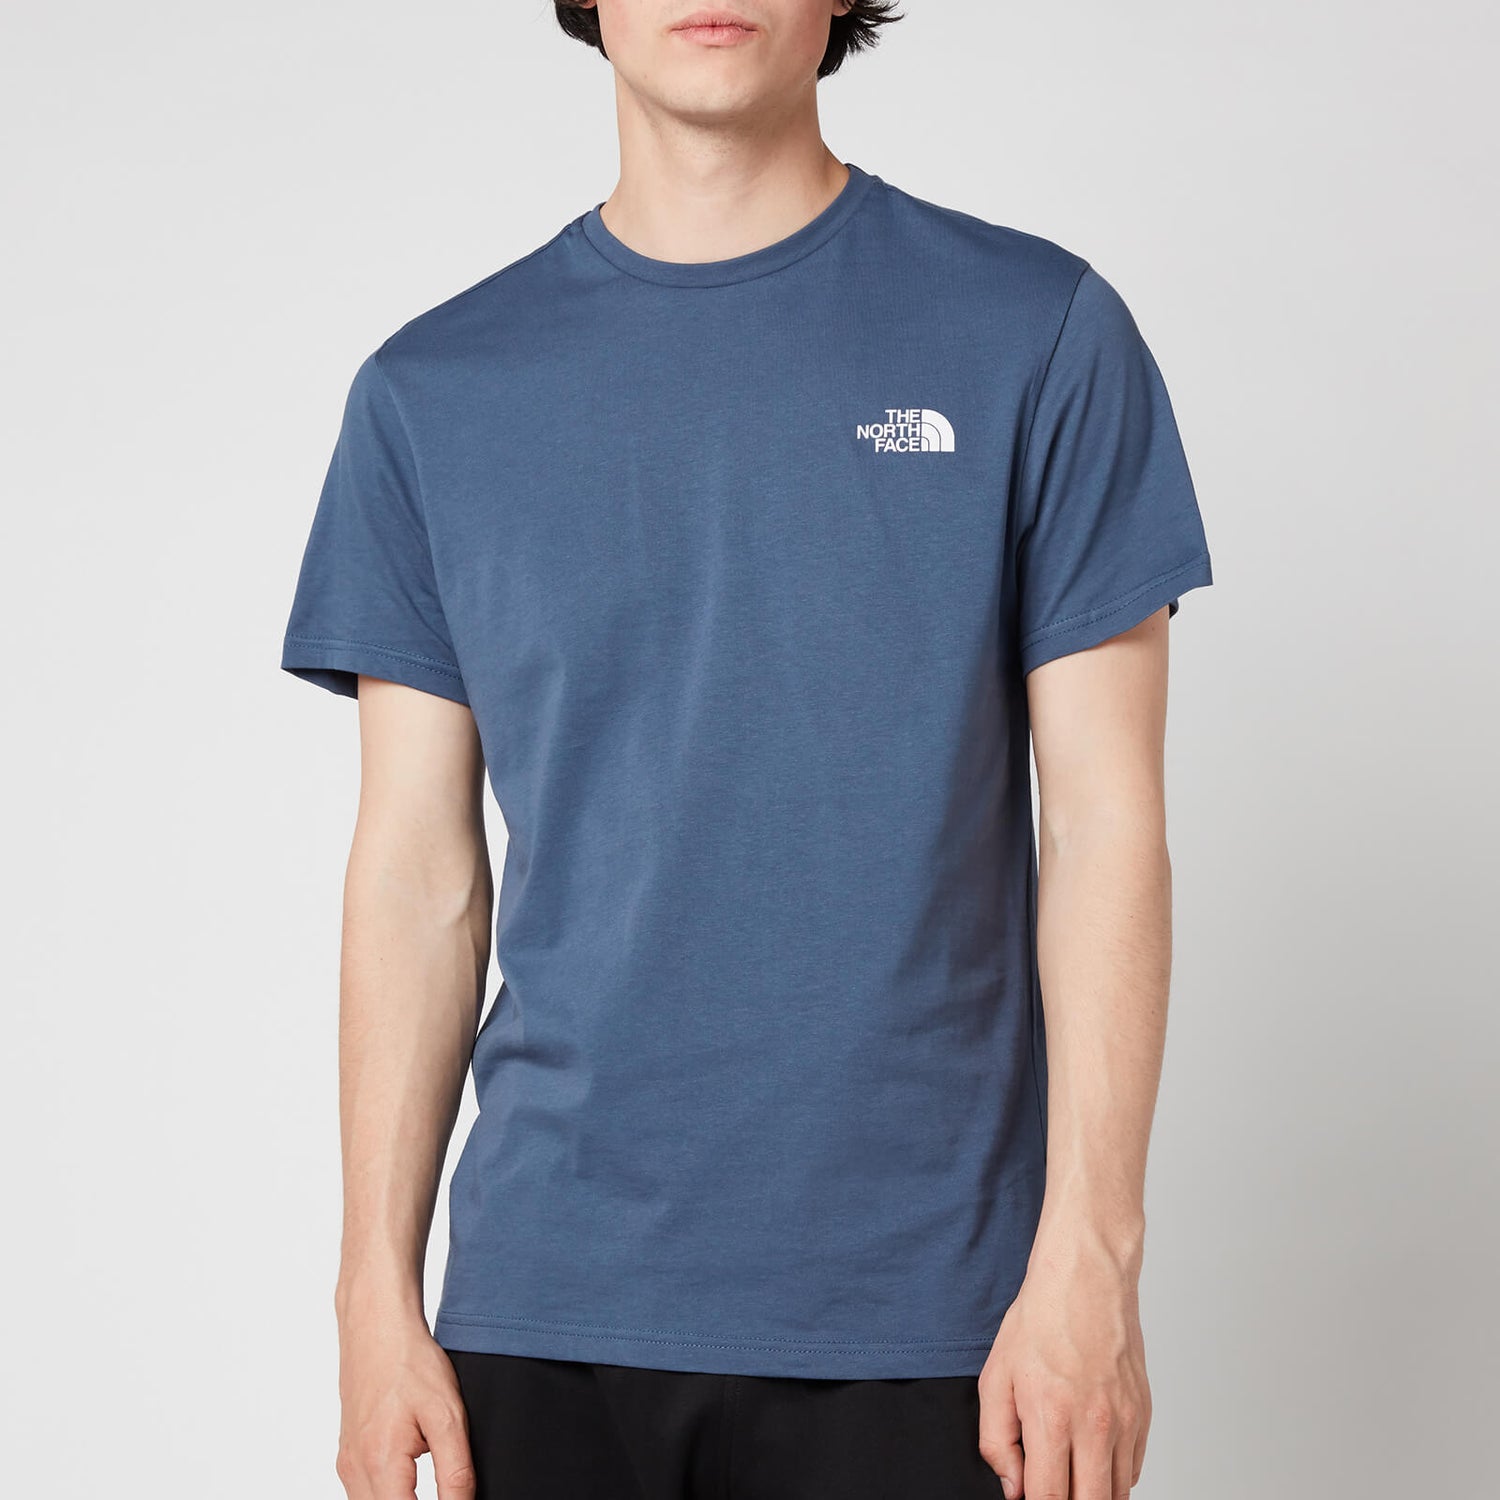 The North Face Men's Simple Dome Short Sleeve T-Shirt - Vintage Indigo